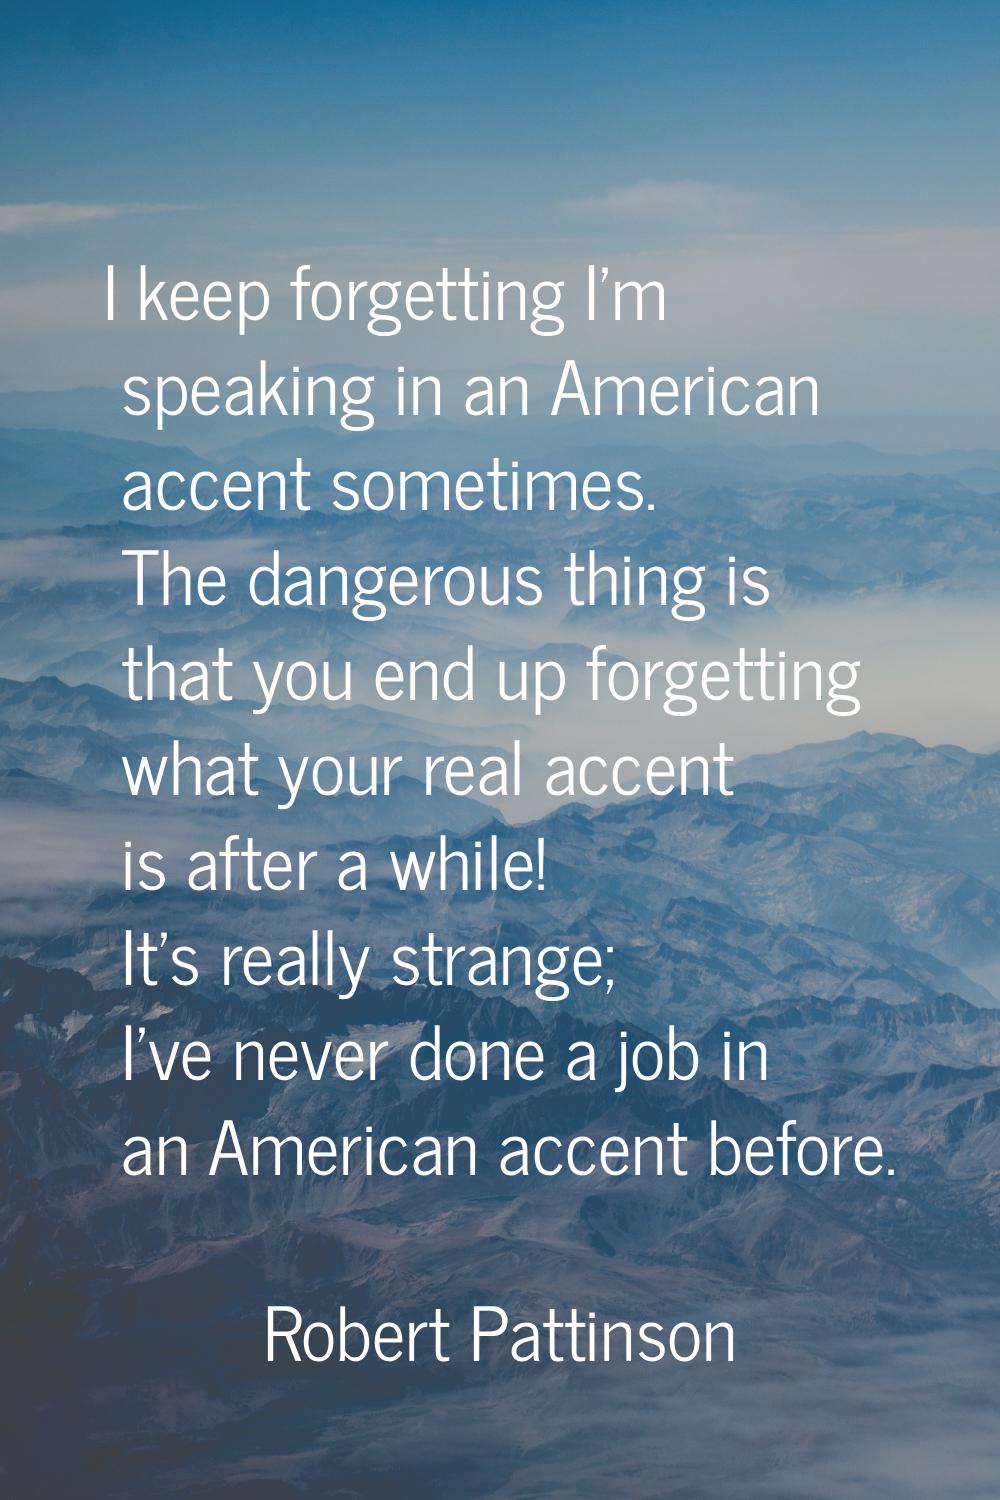 I keep forgetting I'm speaking in an American accent sometimes. The dangerous thing is that you end